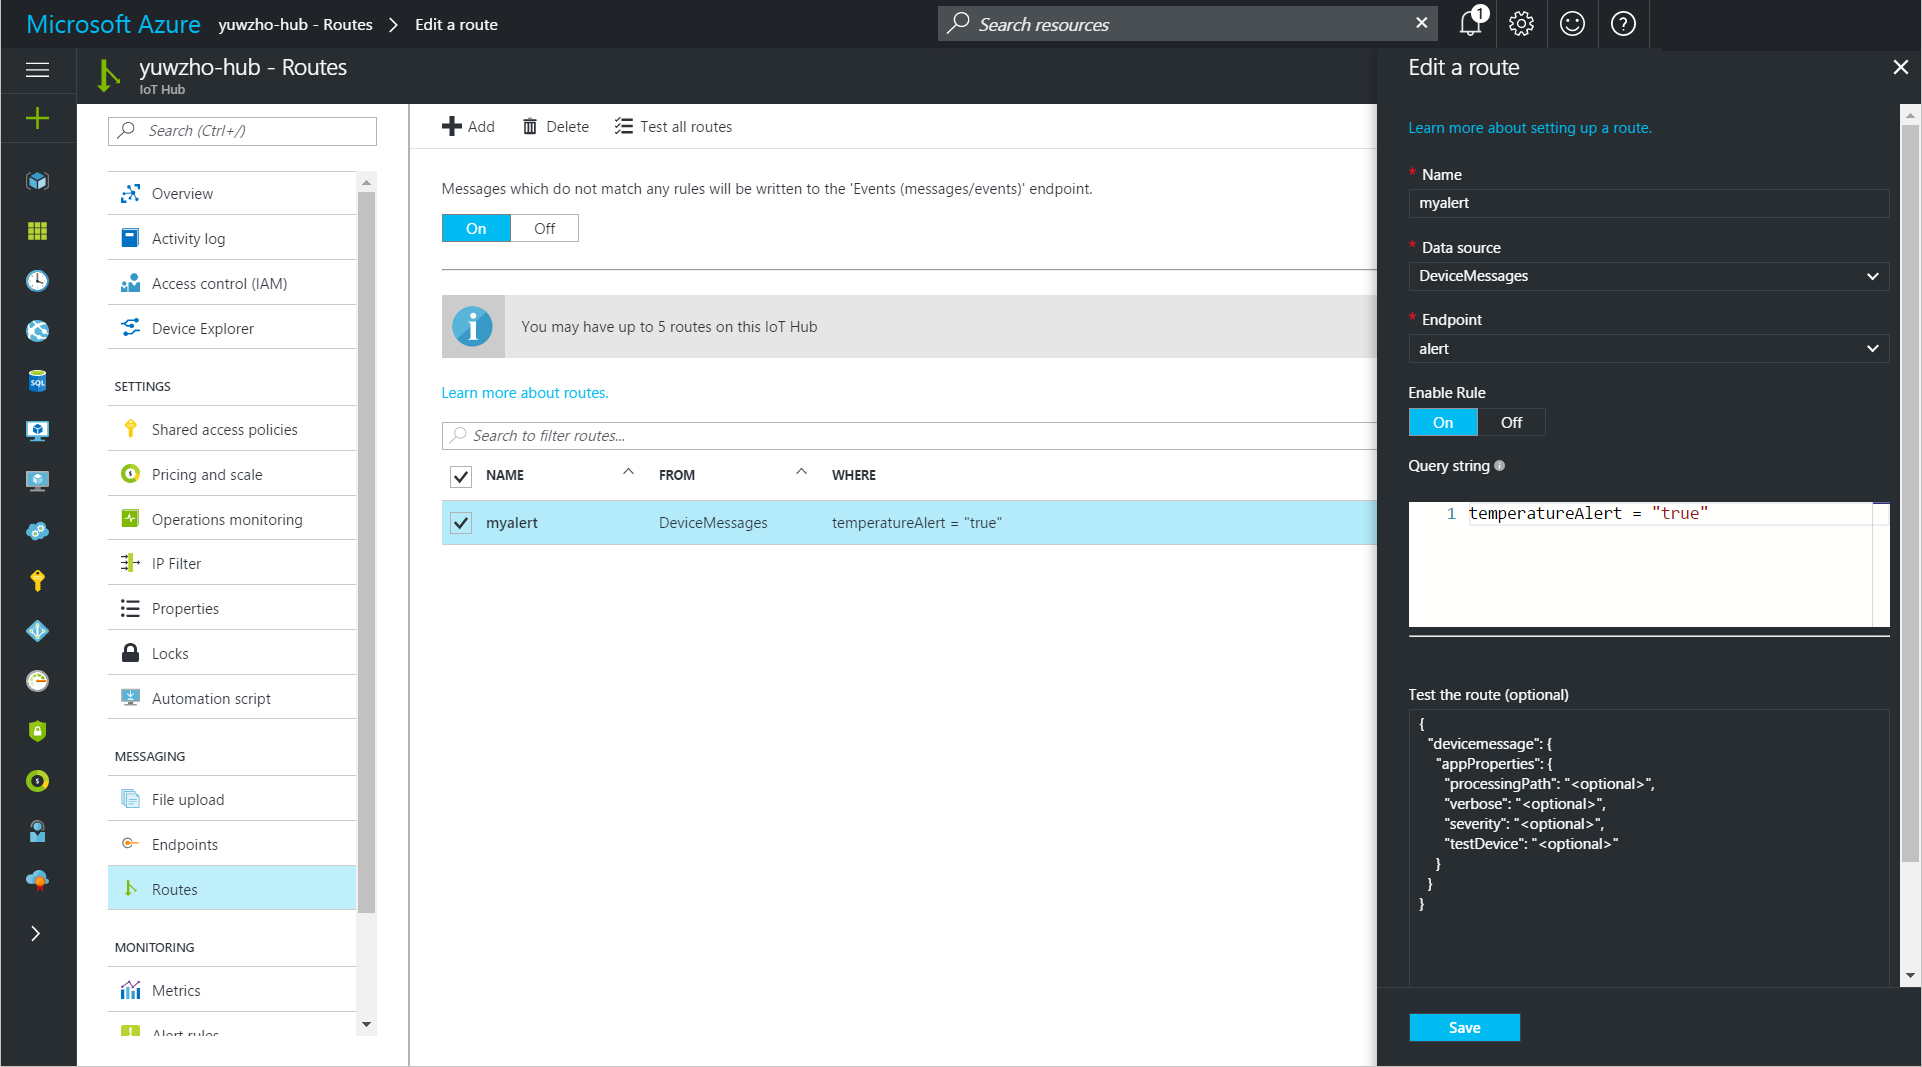 Add a routing rule in the Azure portal